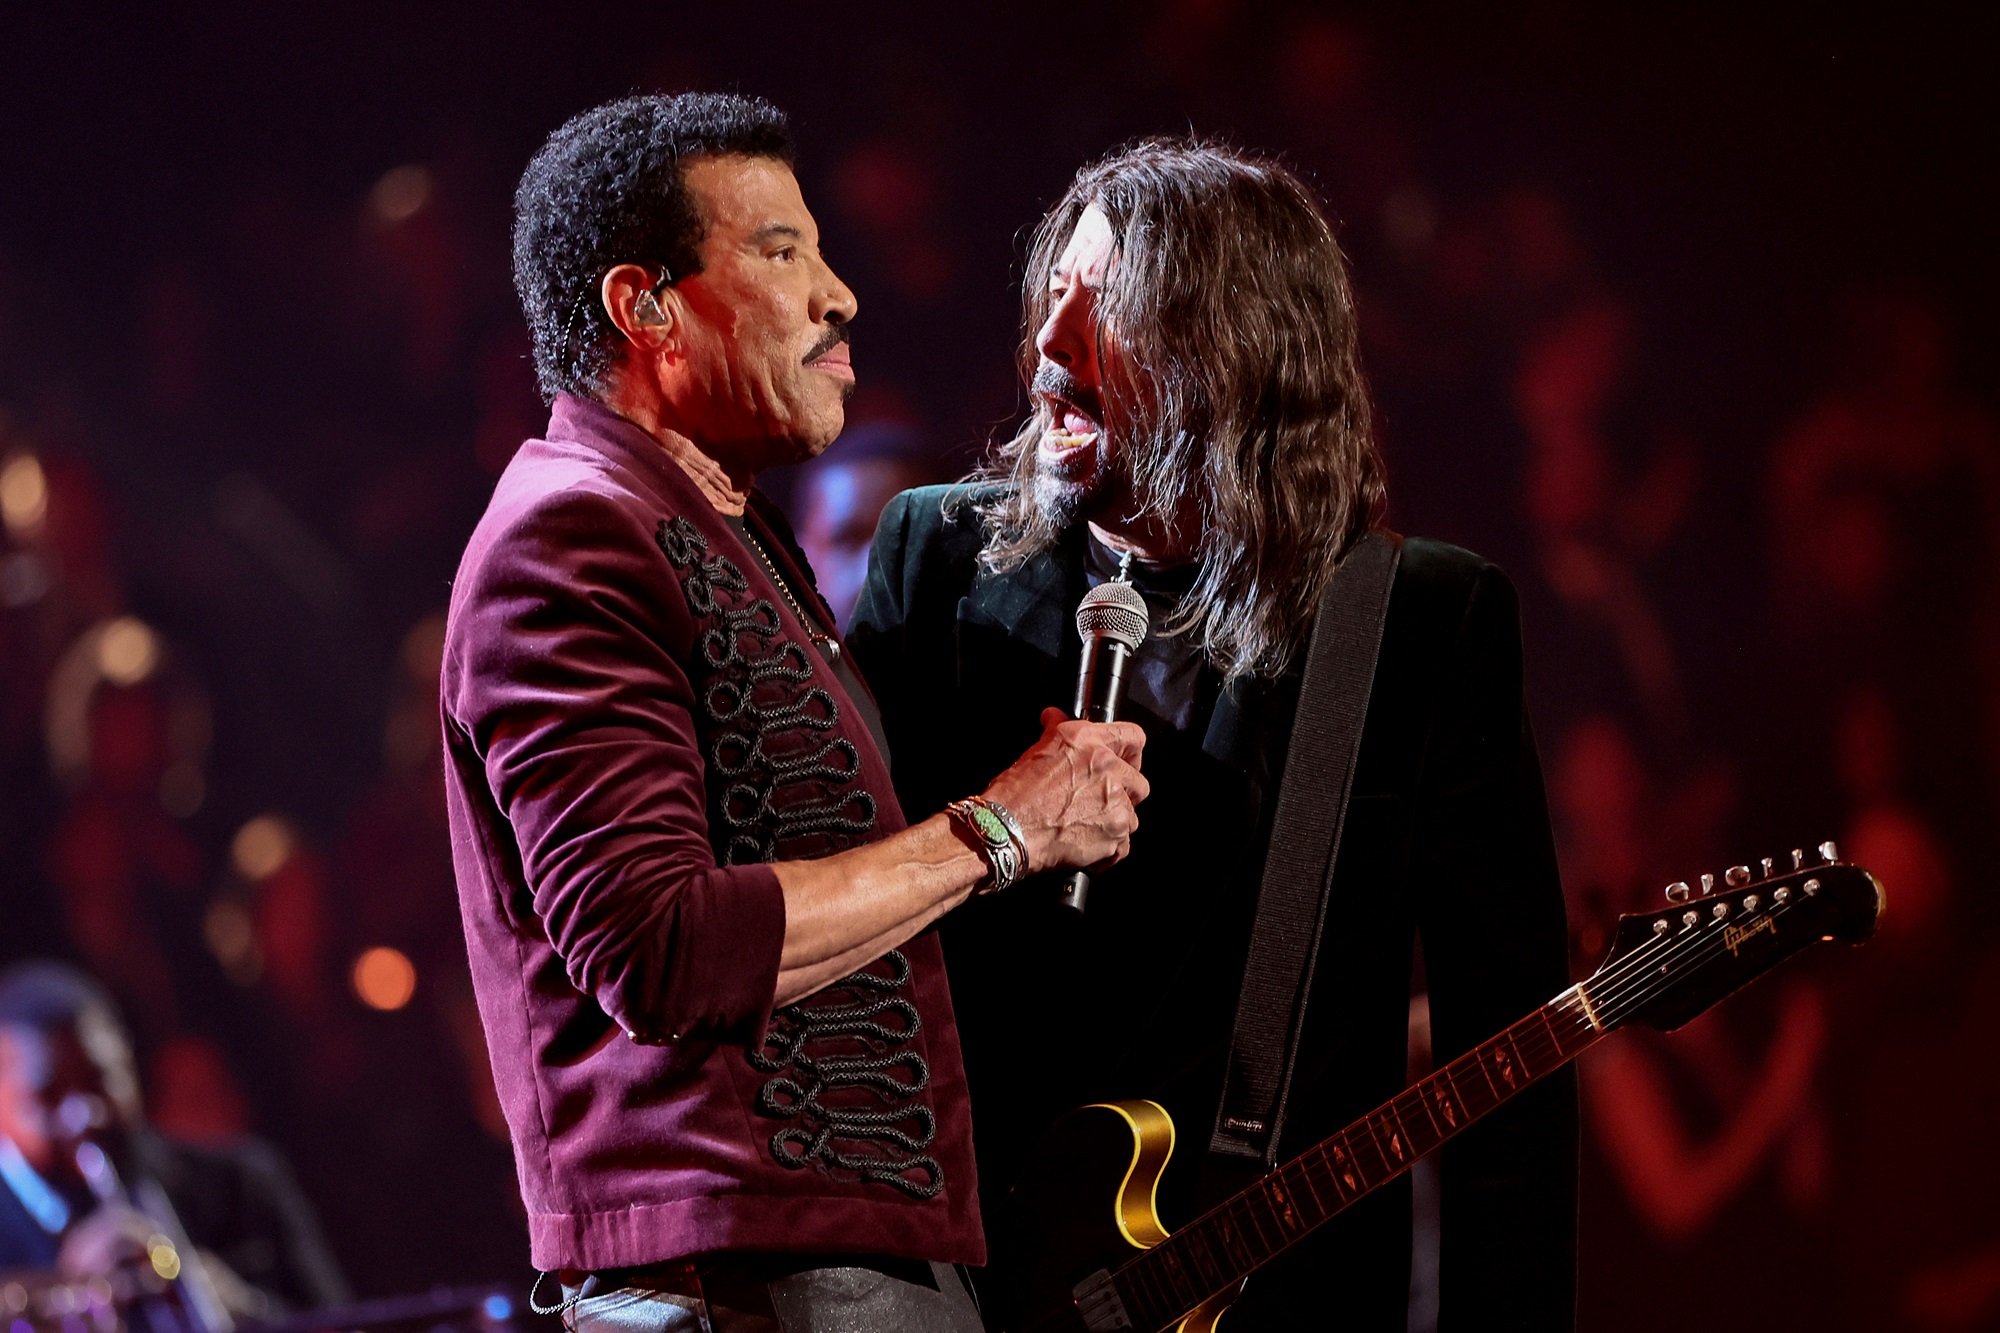 Dave Grohl stands in front of Lionel Richie and sings to him